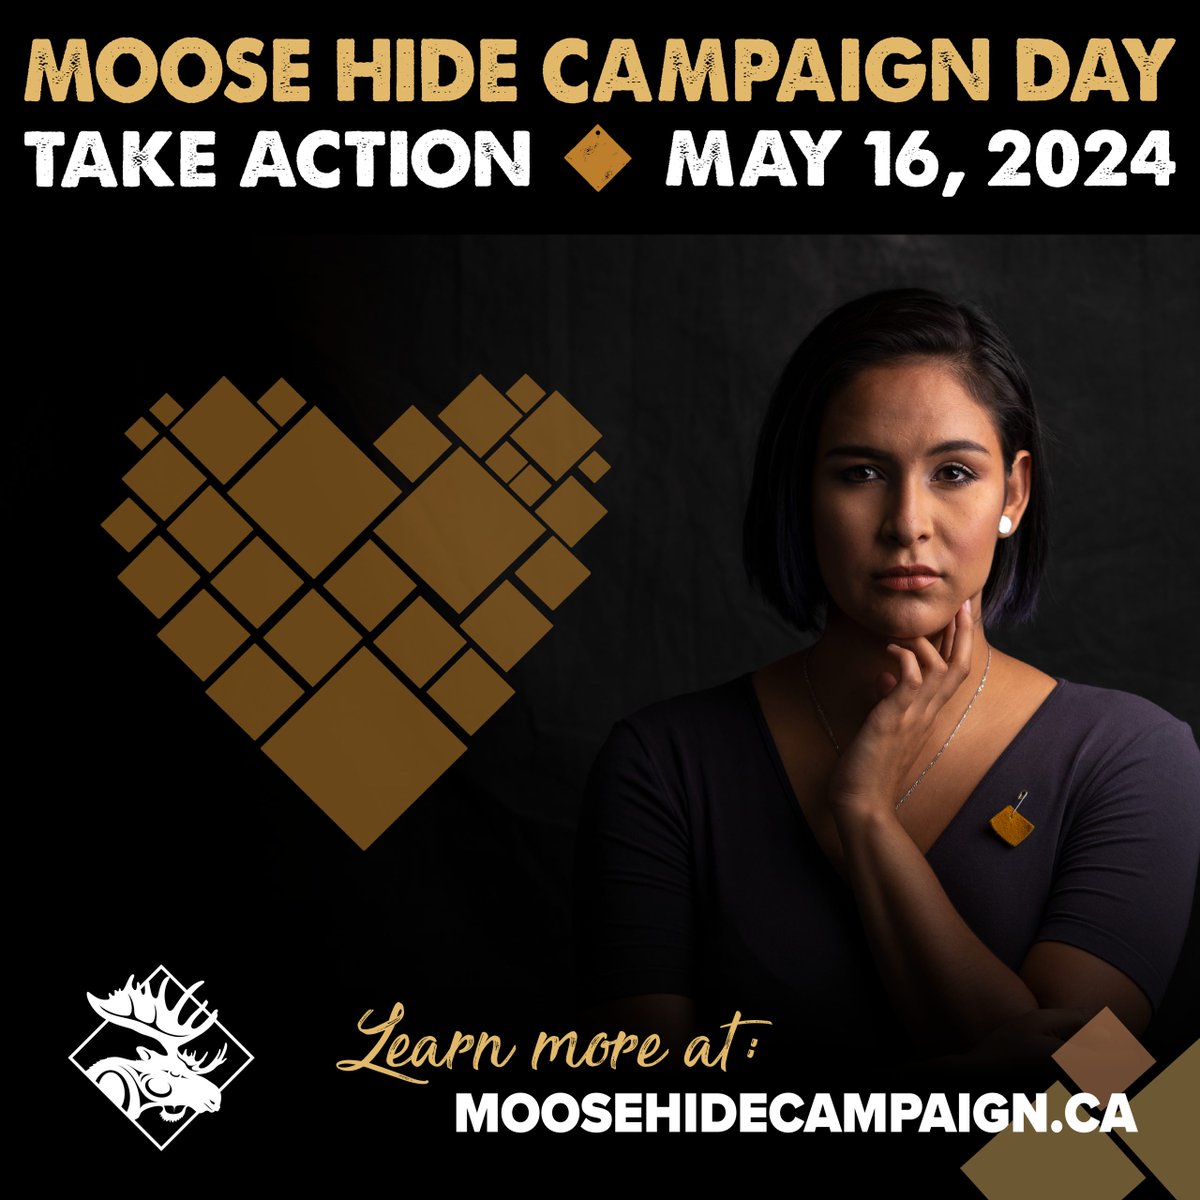 We’re in the midst of an unprecedented mental health crisis. We must come together to heal and prevent violence. That’s why I’m joining #MooseHideCampaignDay moosehidecampaign.ca/campaignda